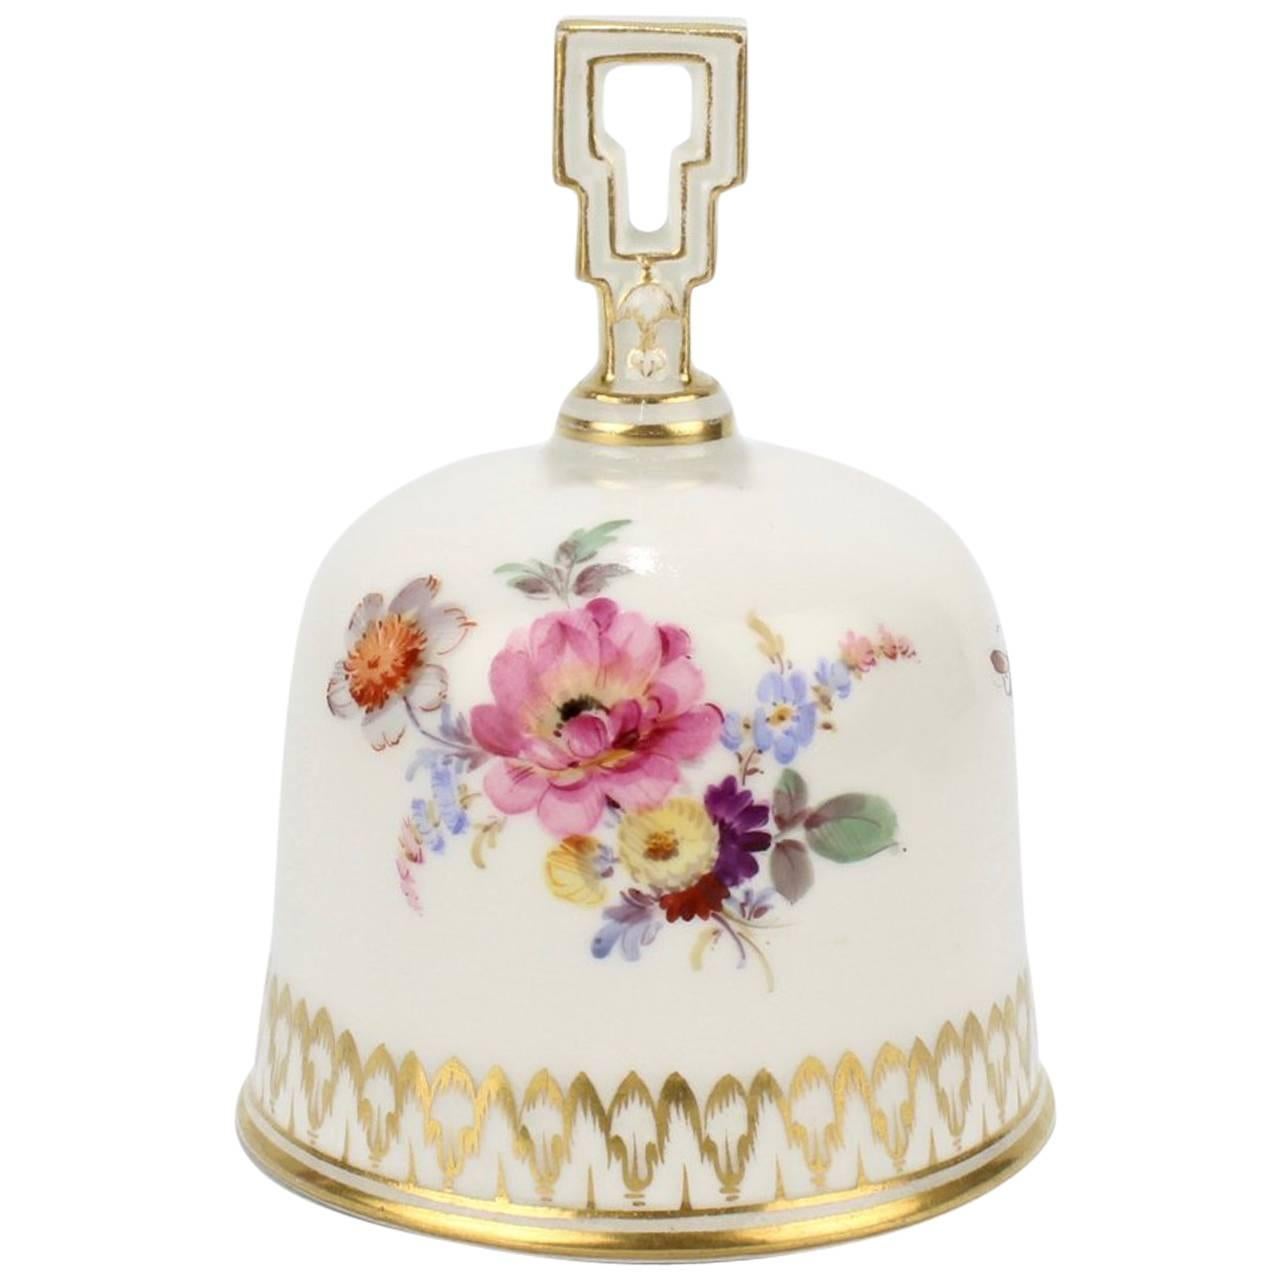 Meissen Porcelain Table Bell with Hand-Painted Dresden Flowers Decoration